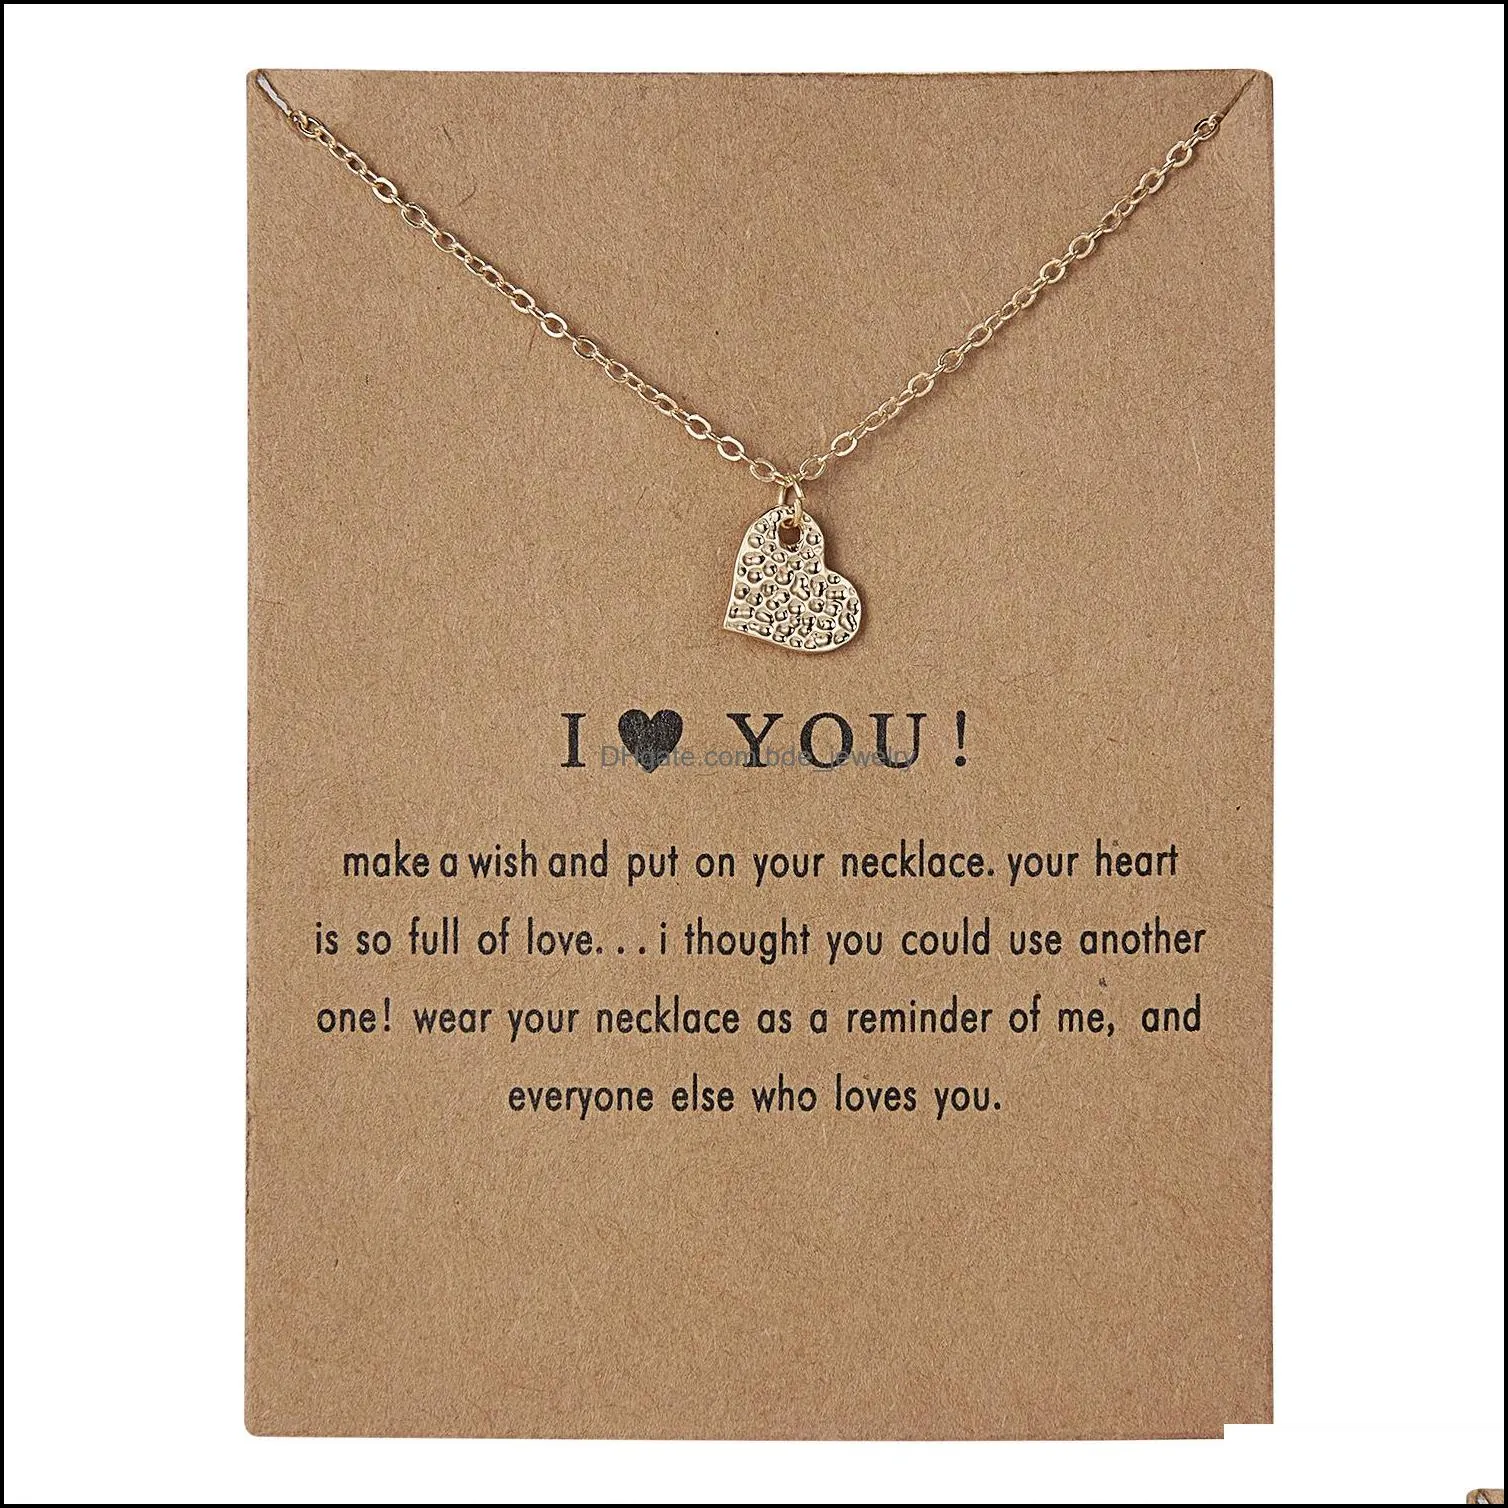 i love you card necklace female gift trendy gold color love heart pendant clavicle chain choker necklaces for women jewelry